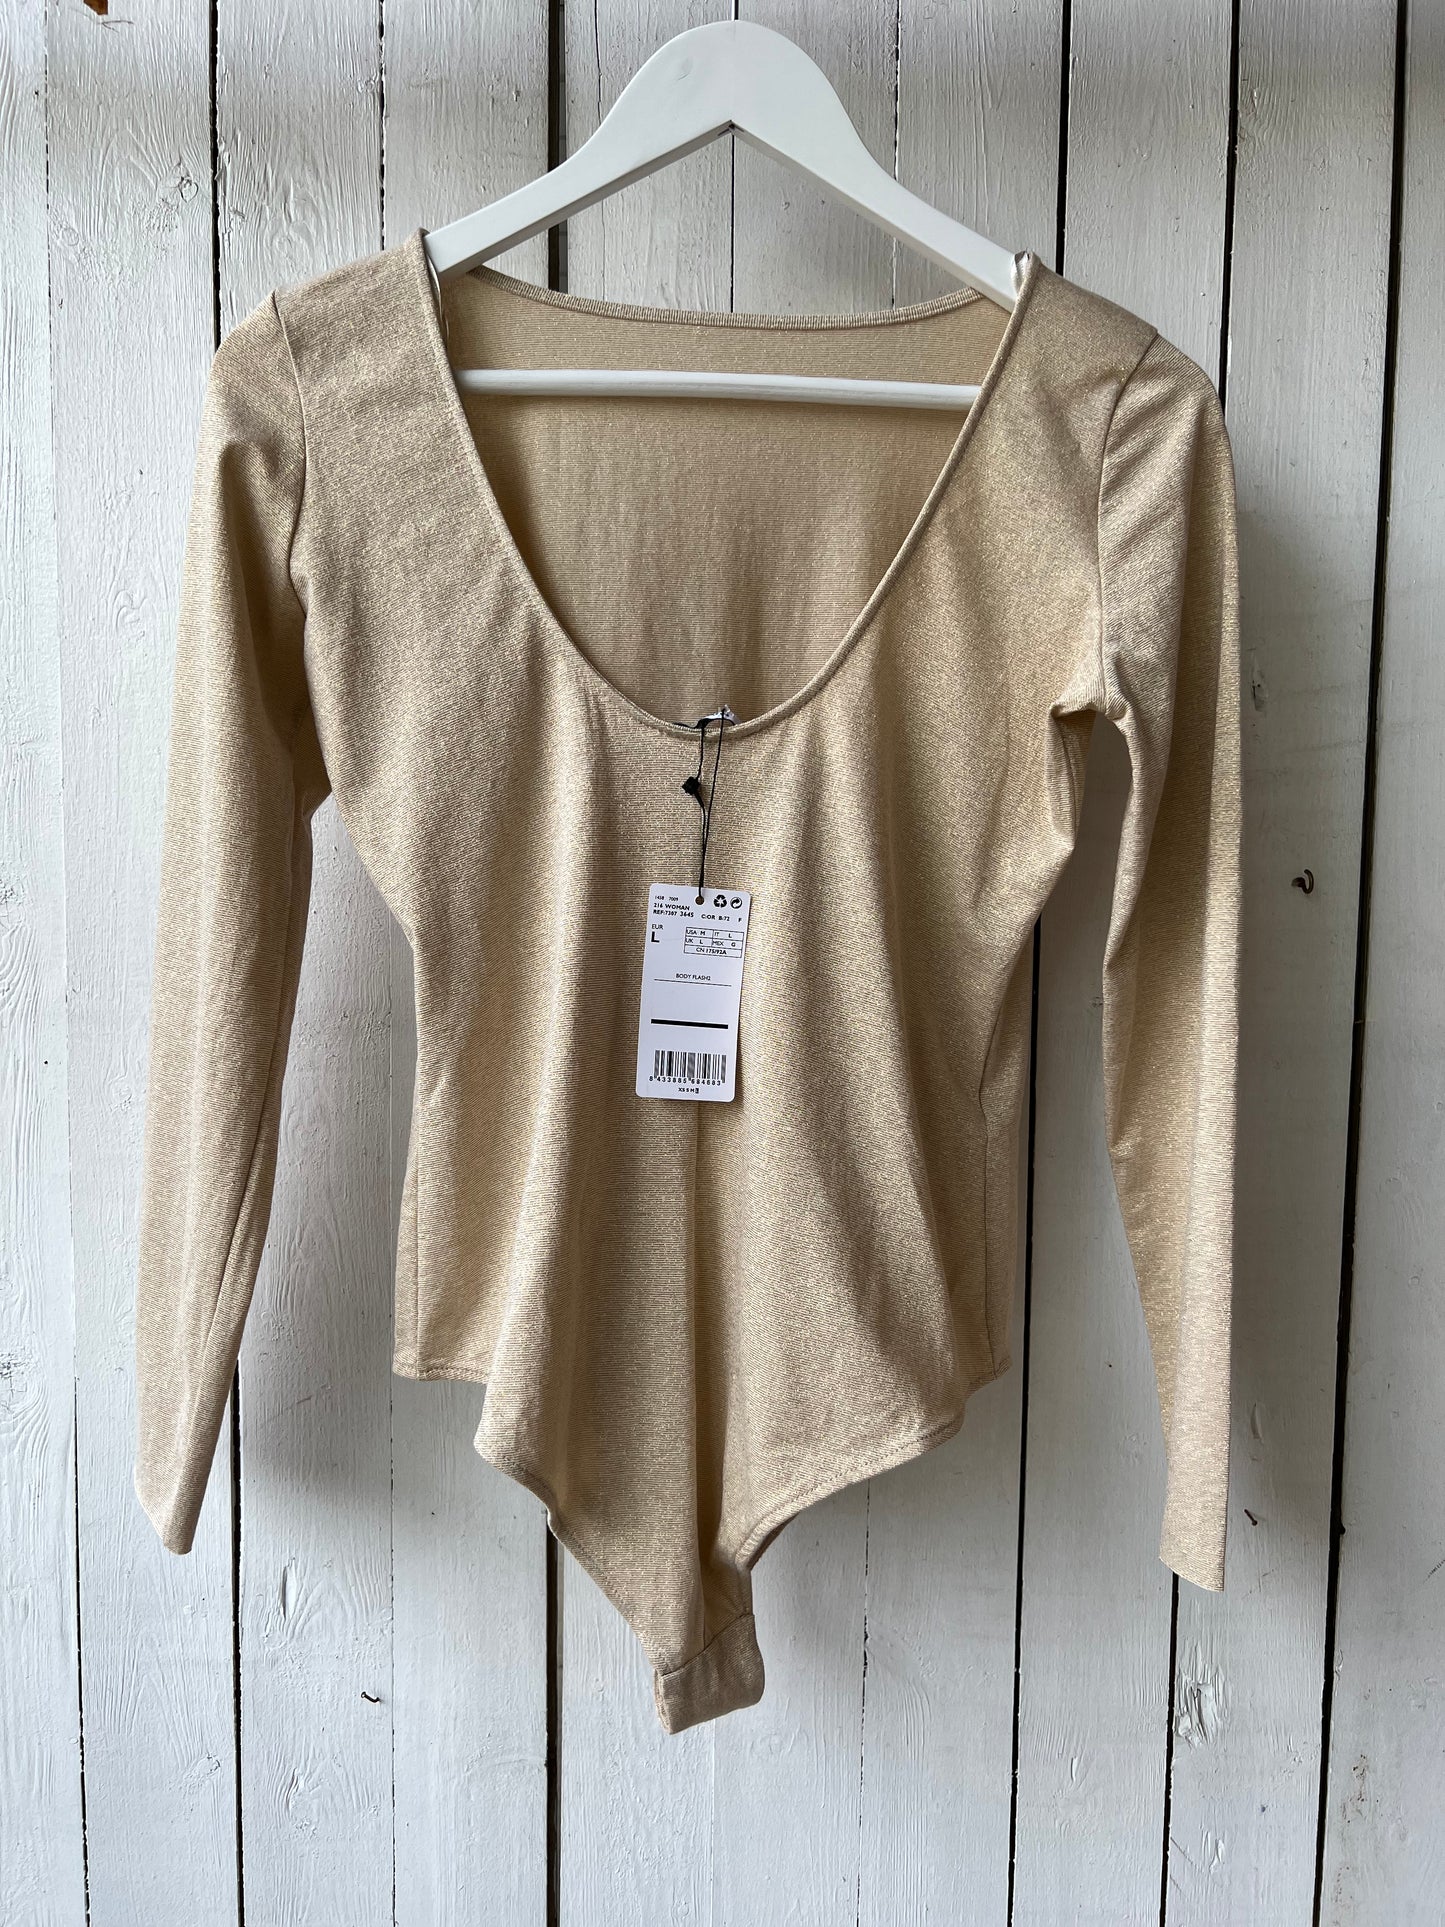 Shimmer Gold Body Suit - Size M